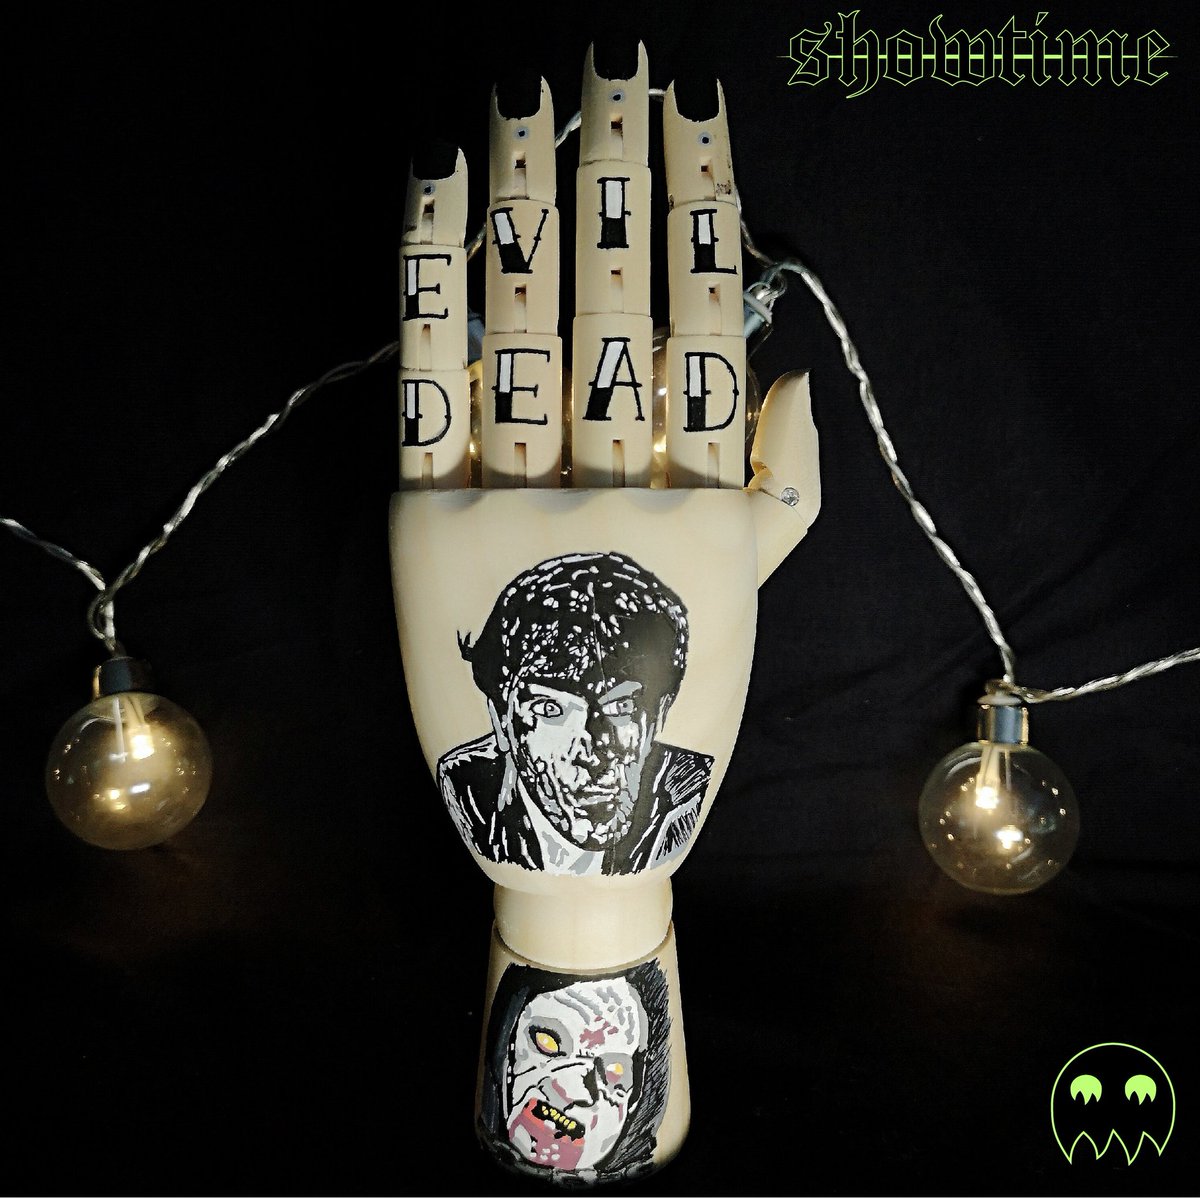 showtime hands!freddy krueger, hellraiser and evil dead are all still availablethese are all around 18 months old, they need homes https://robcryptx.bigcartel.com/category/showtime